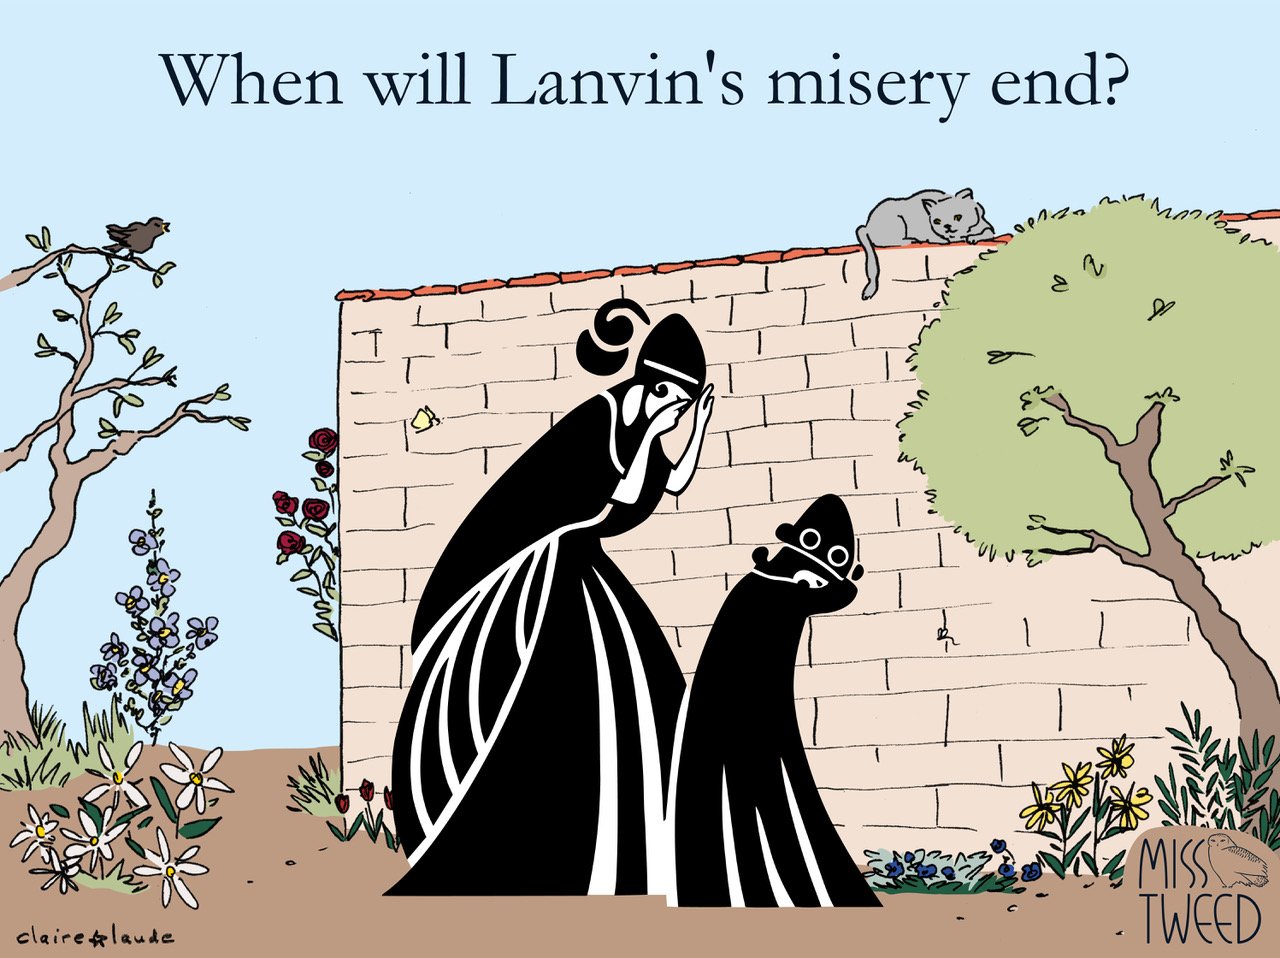 Lanvin's misery shows no sign of abating